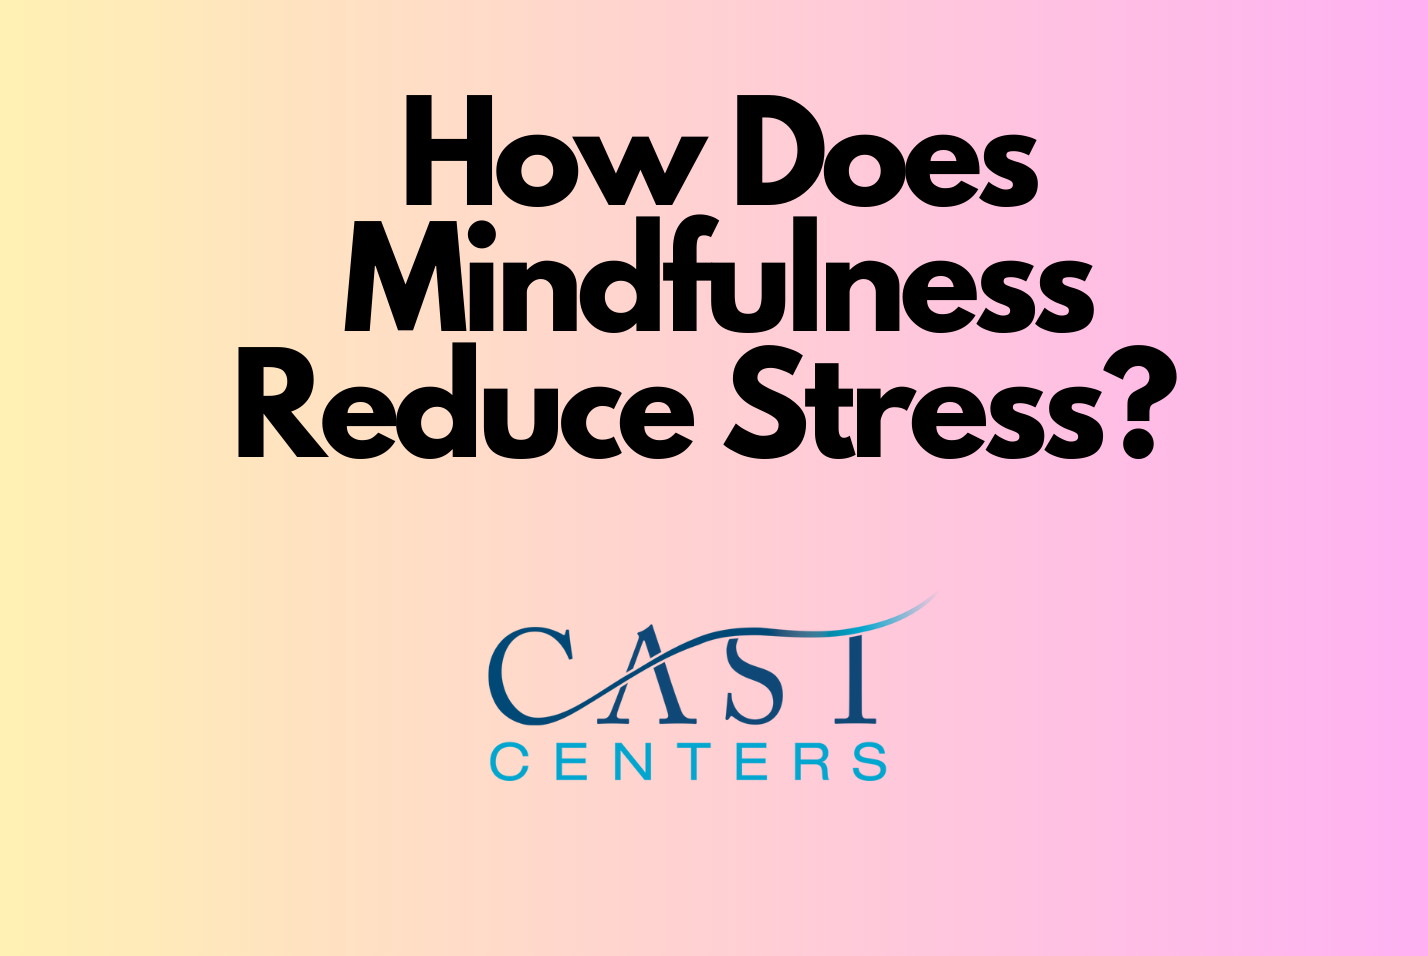 How does mindfulness reduce stress?